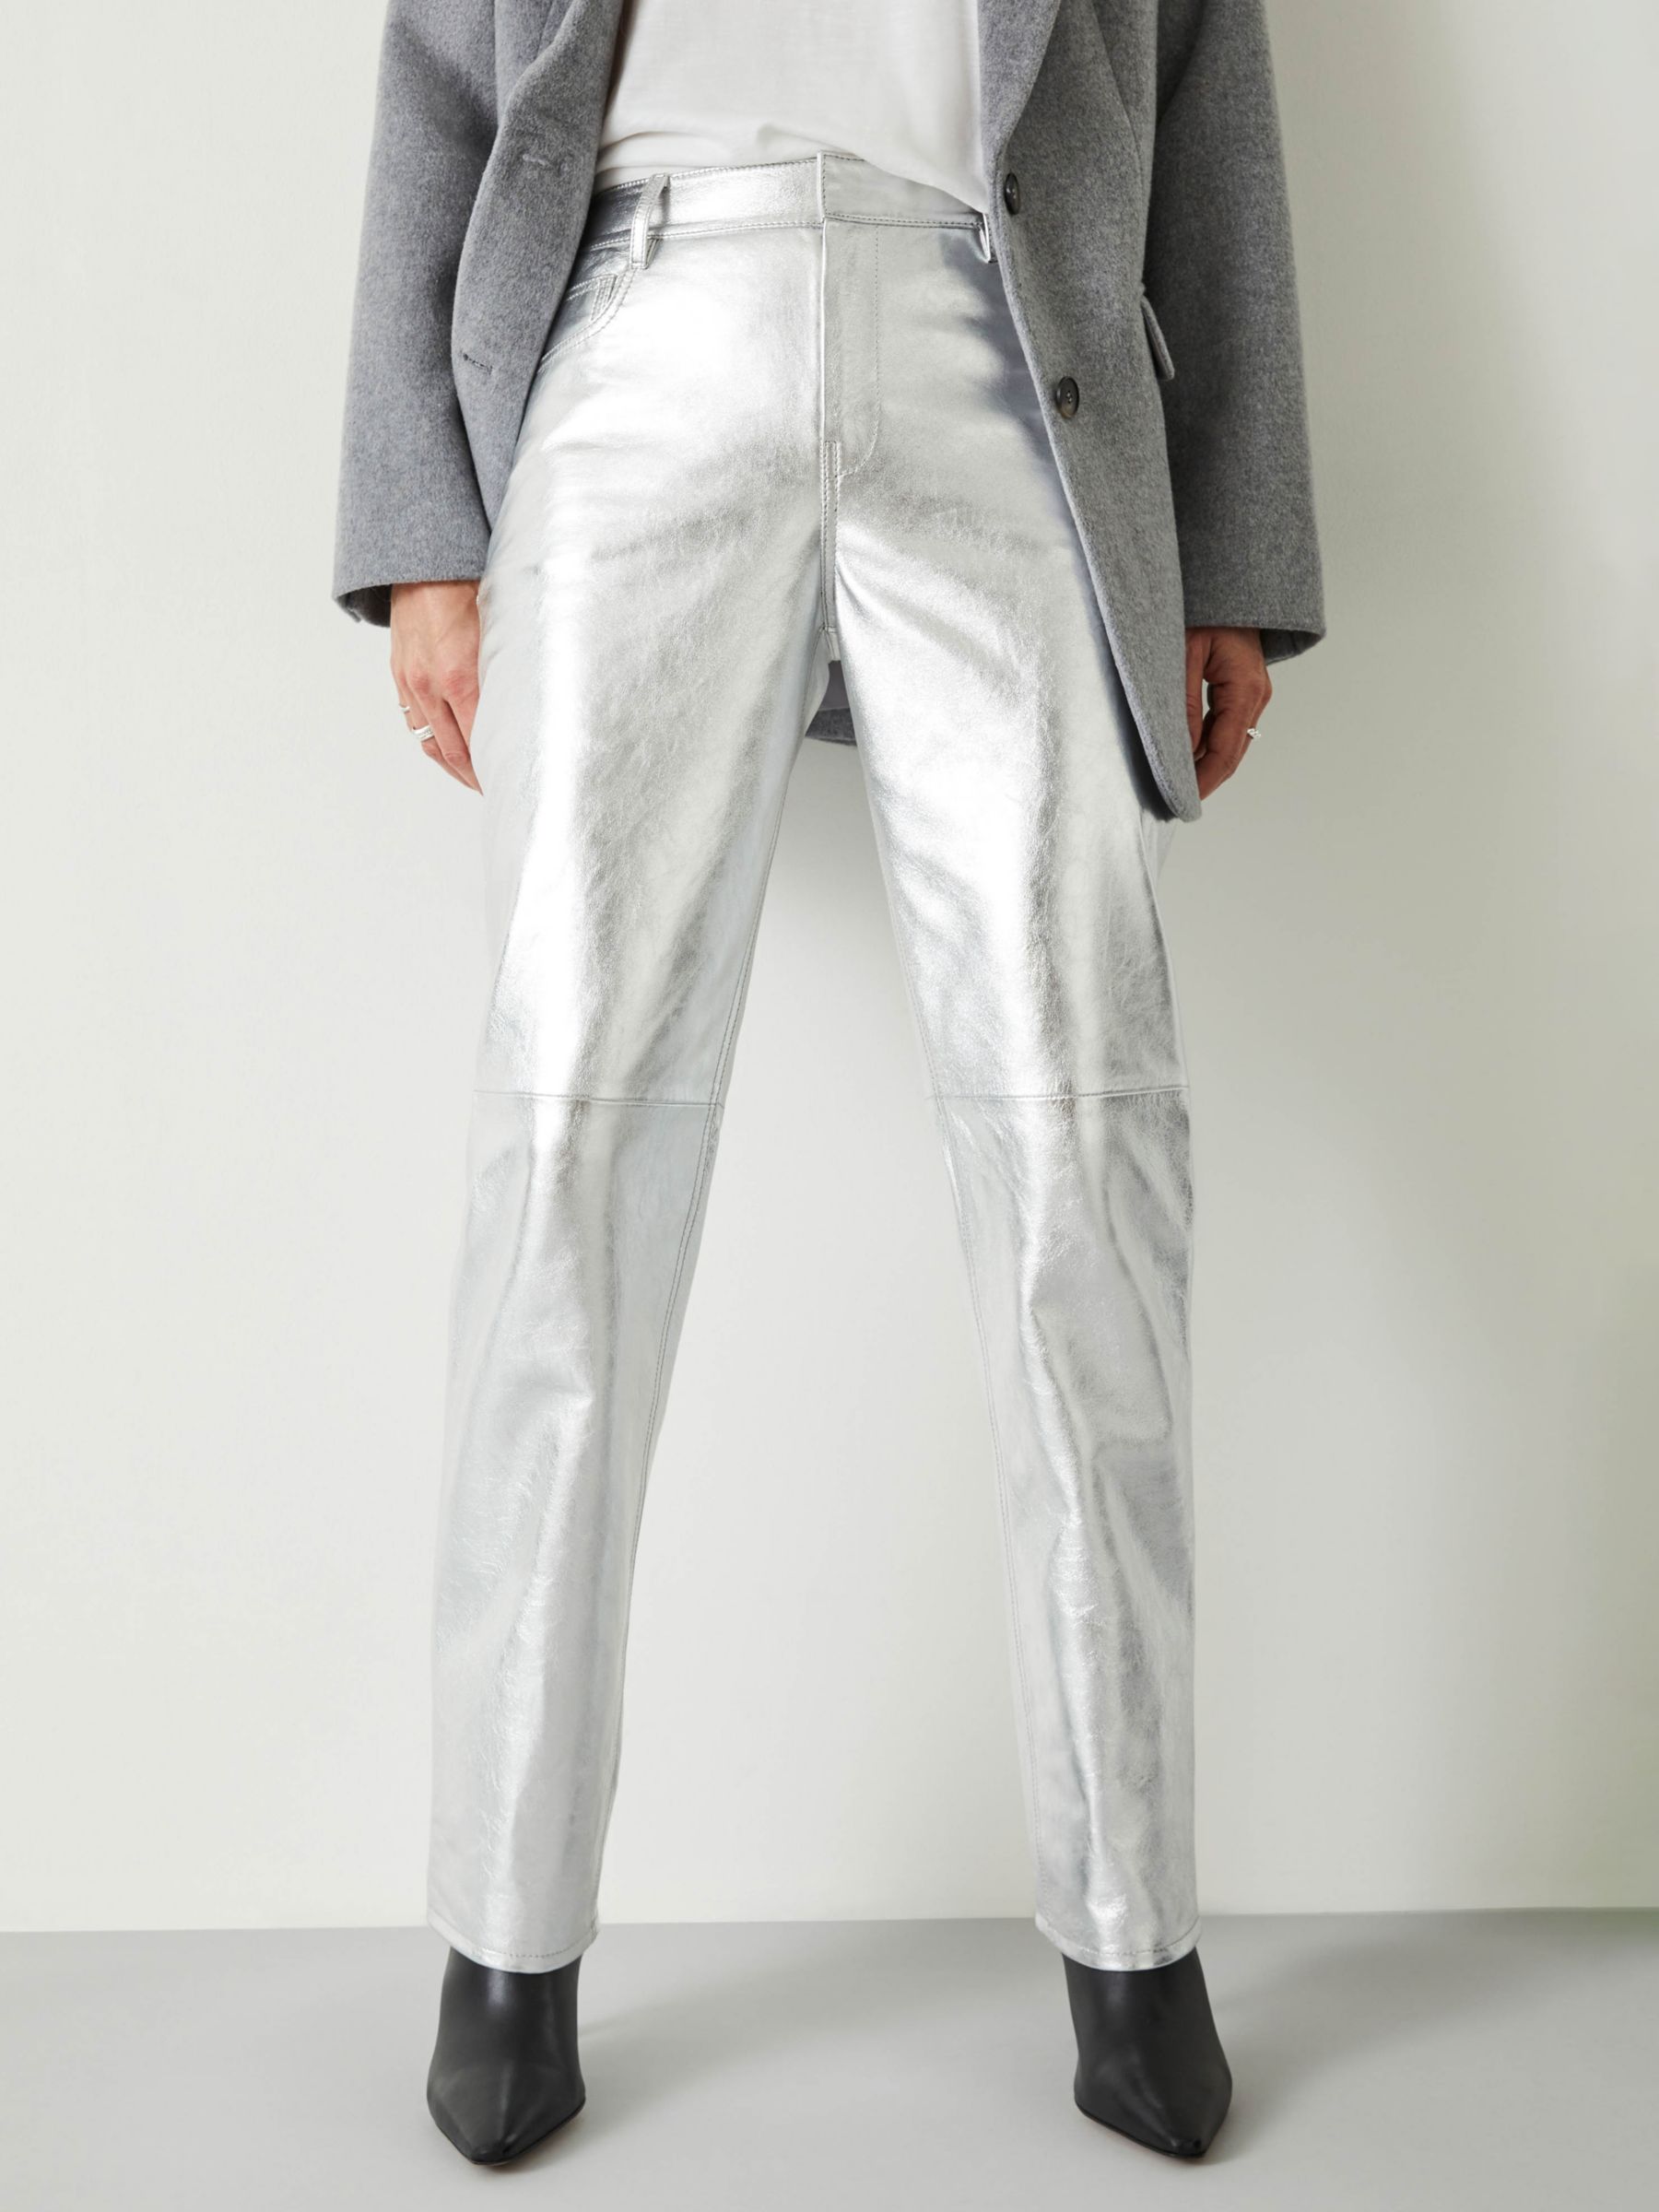 HUSH Leather Trousers, Silver Foil £299.00